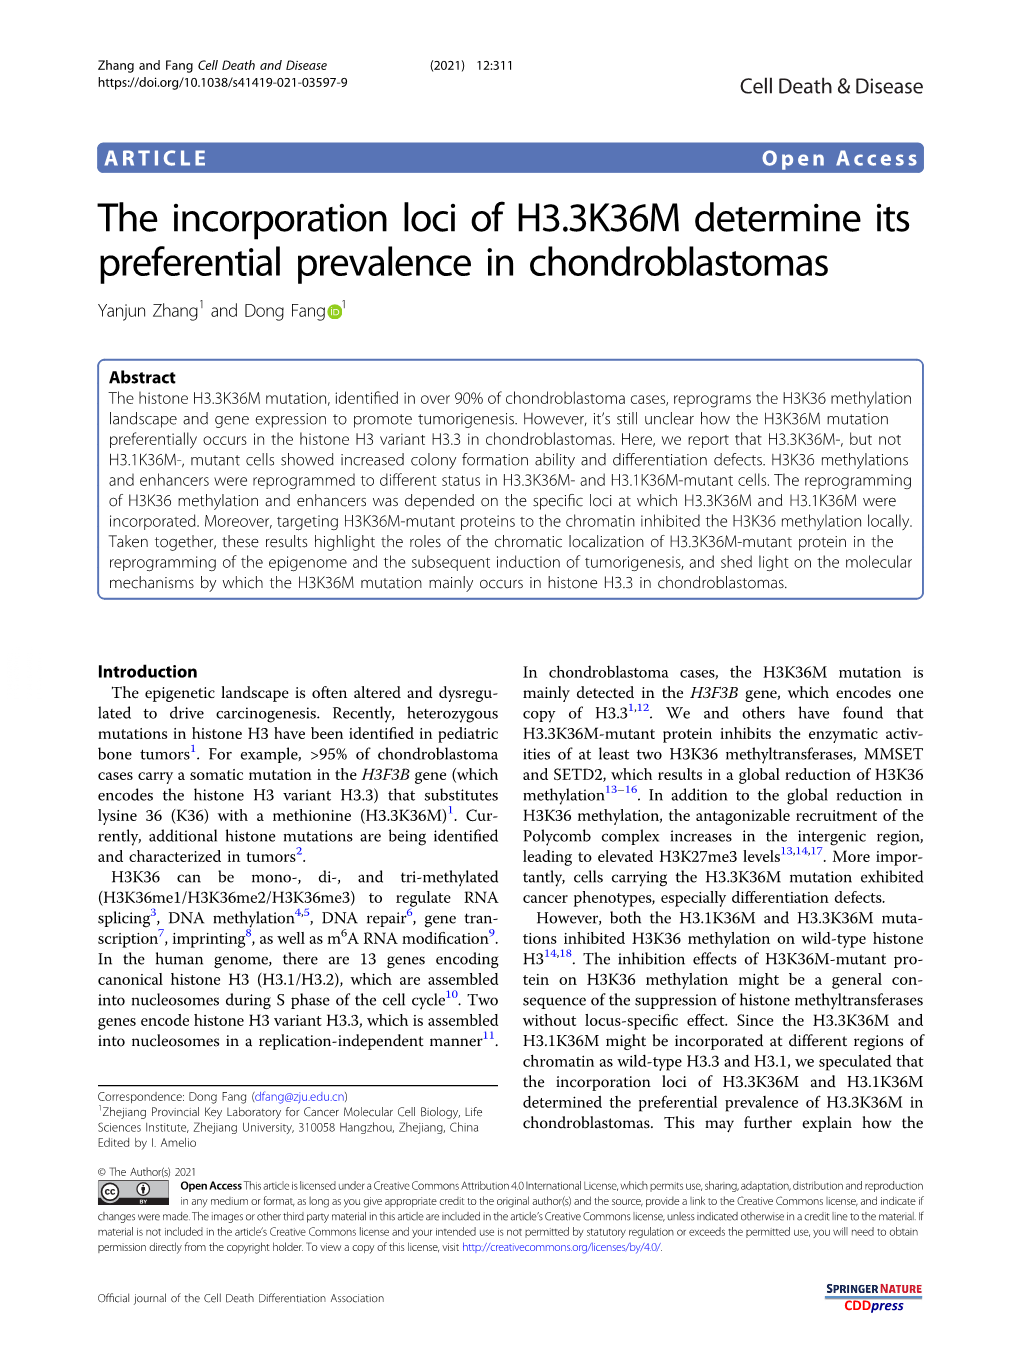 The Incorporation Loci of H3.3K36M Determine Its Preferential Prevalence in Chondroblastomas Yanjun Zhang1 Anddongfang 1